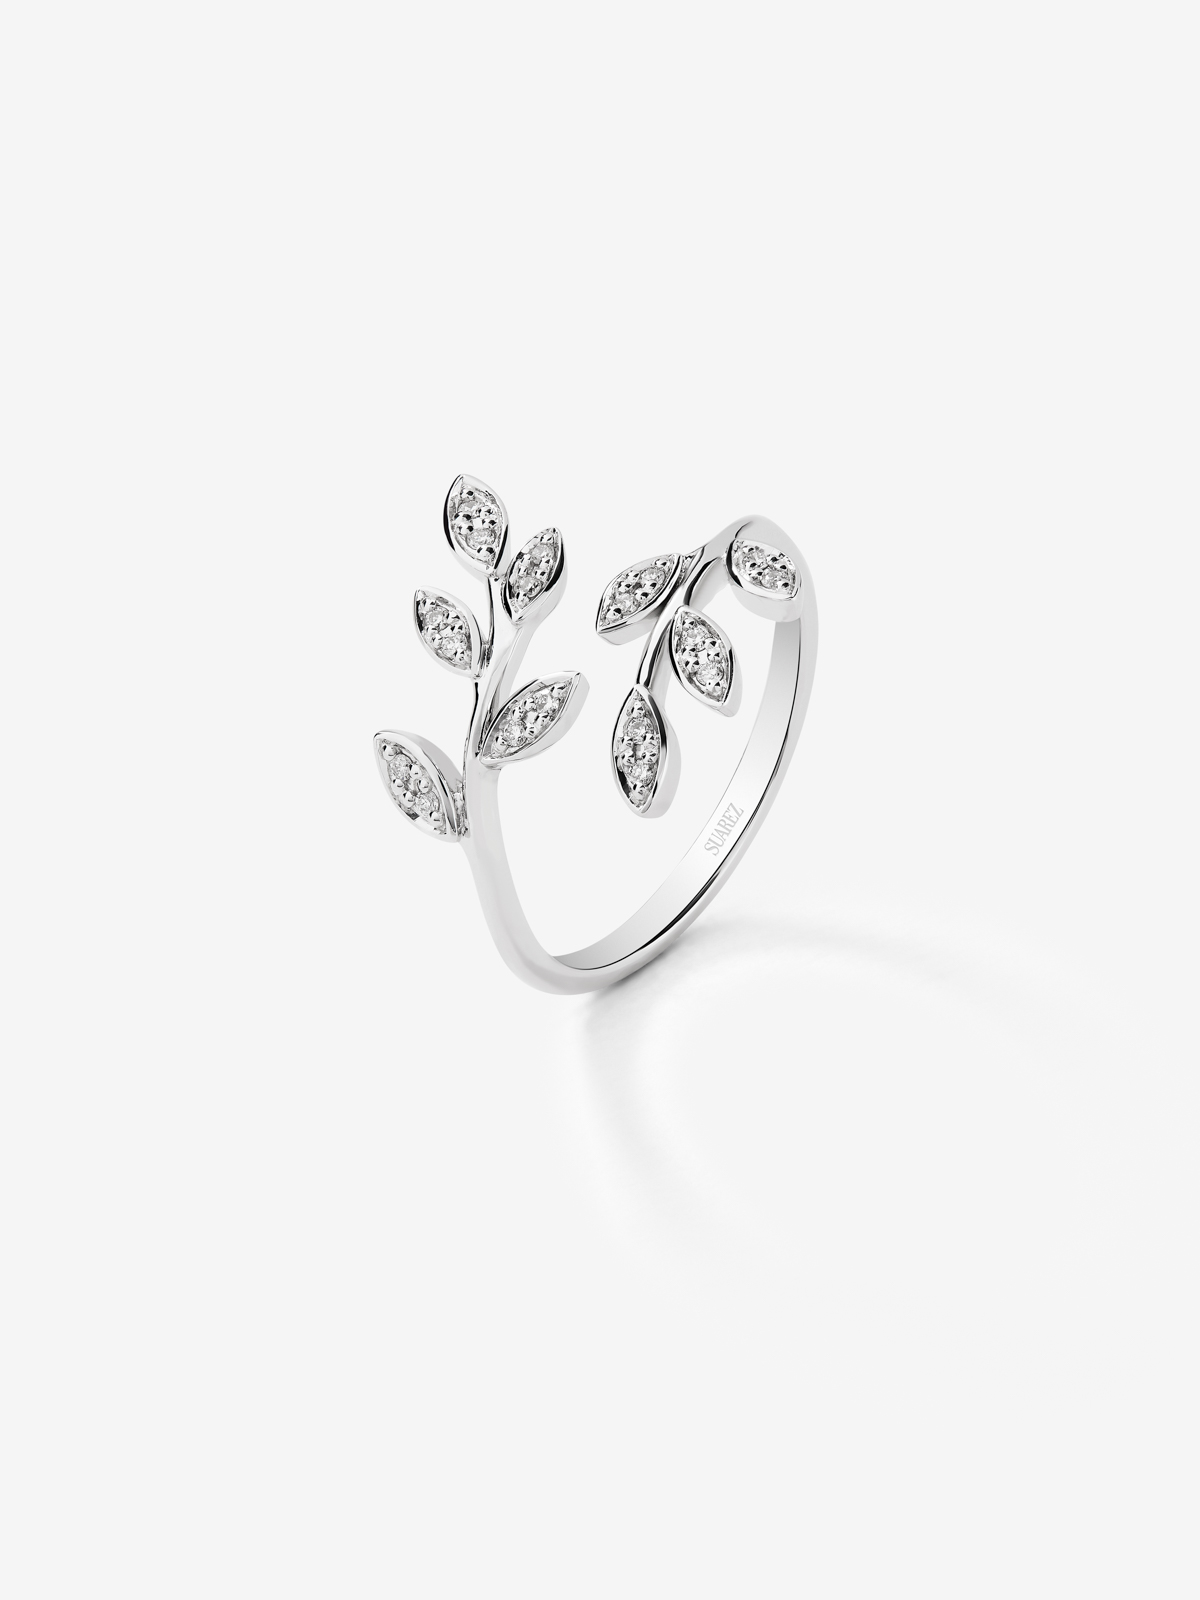 18K White Gold Leaf Ring with Pave Diamond